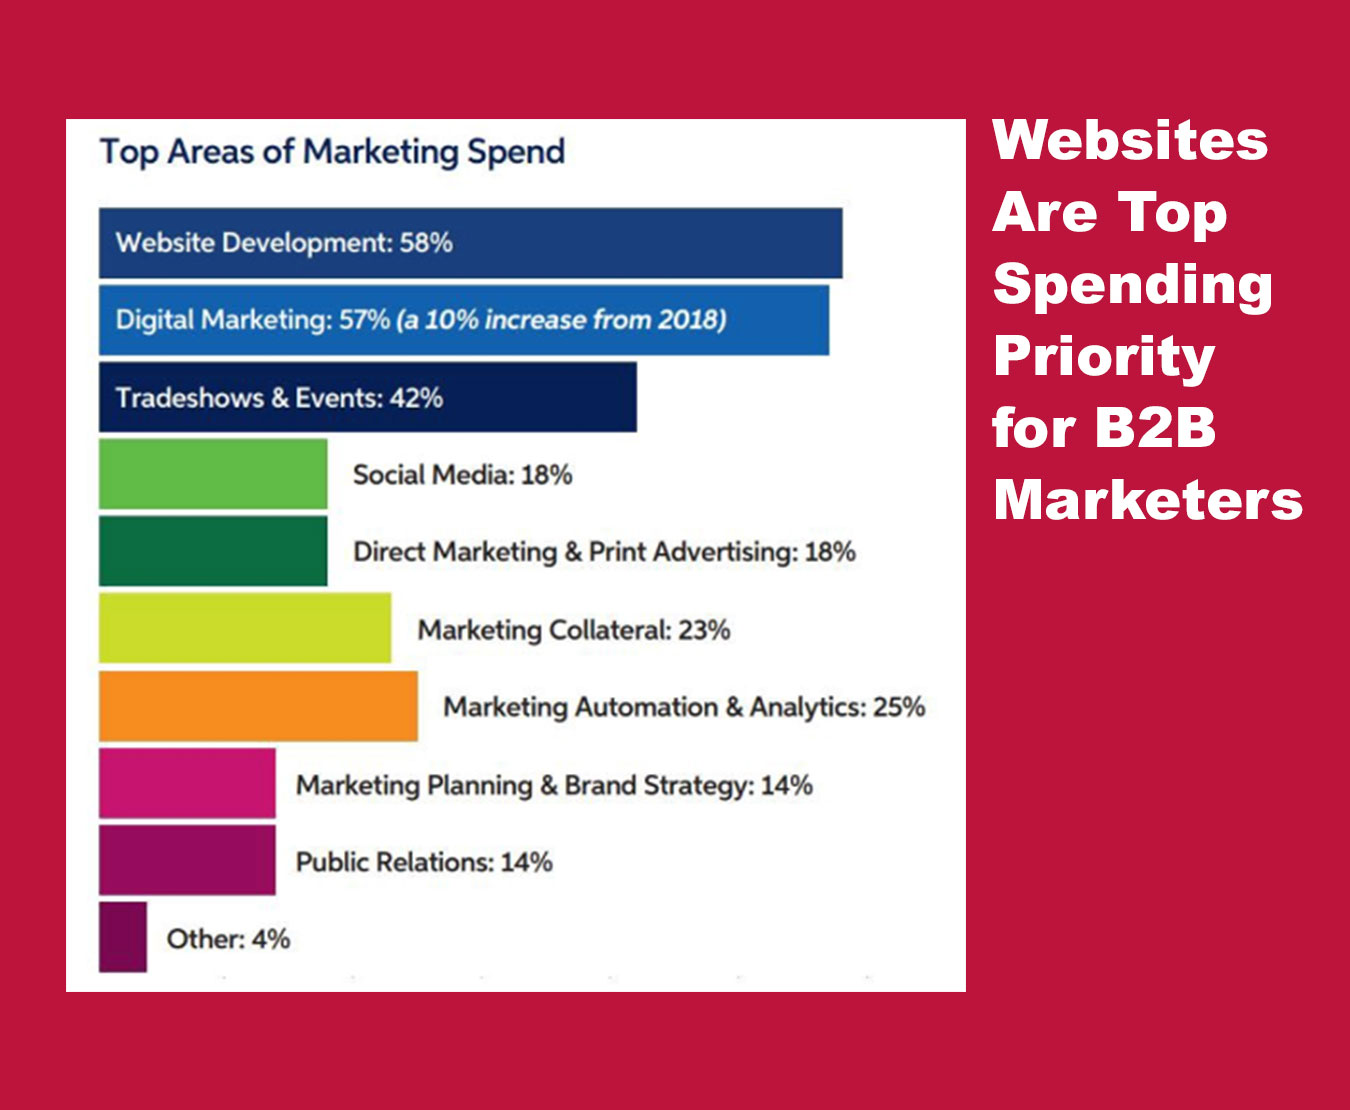 industrial manufacturing website priorities show in this research about how B2B marketers are spending their marketing budgets. 58% reported that website development was the top area of marketing spend. 57% reported that digital marketing was top. 42% reported that tradeshows and events was their top spending category.